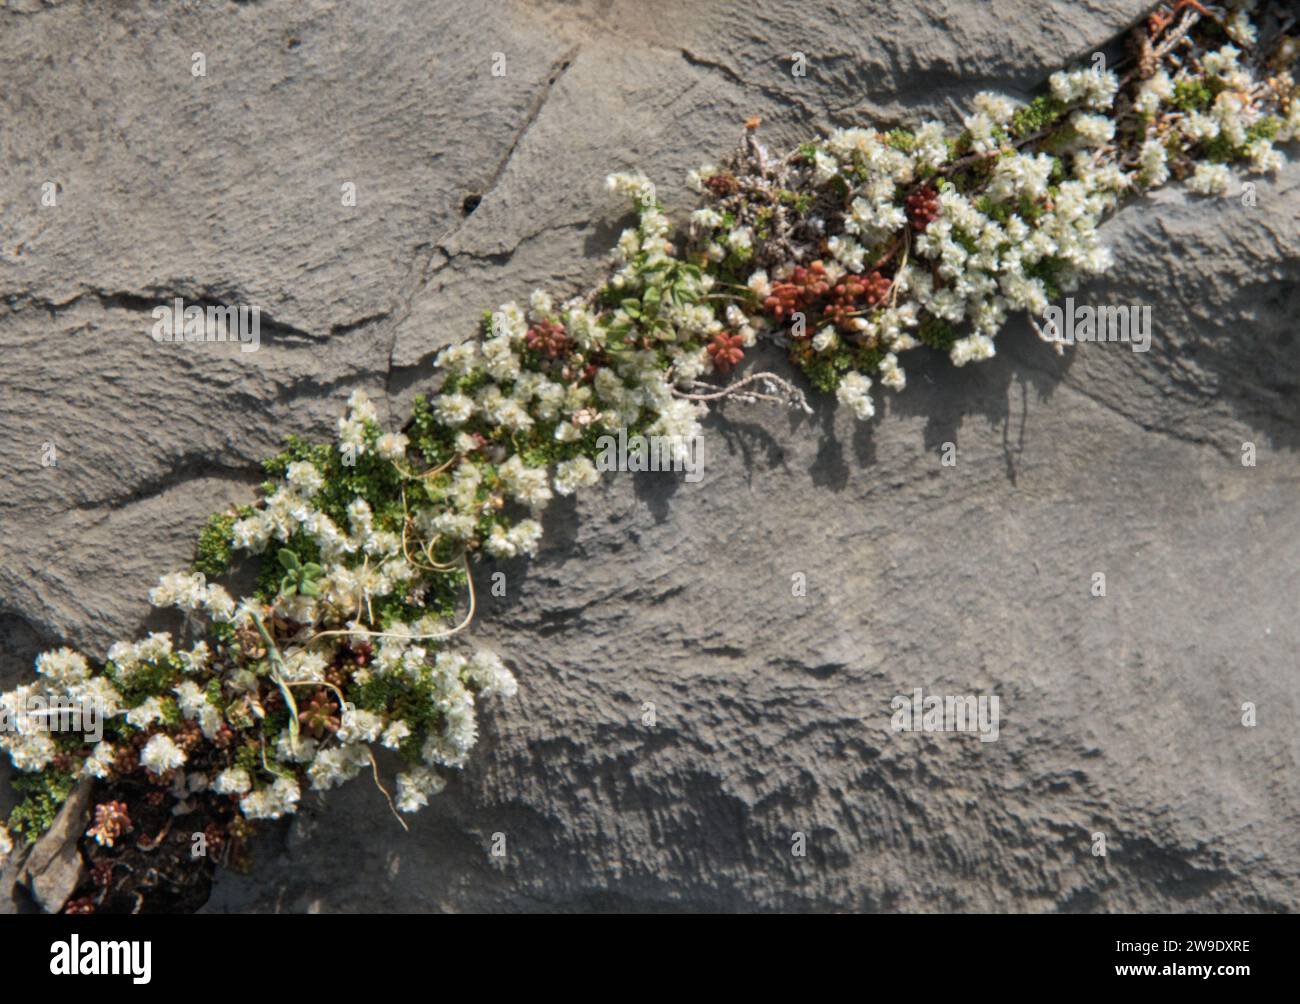 Nailwort, Paronychia kapela, small white flowers growing plant growing in a crack of a rock Stock Photo